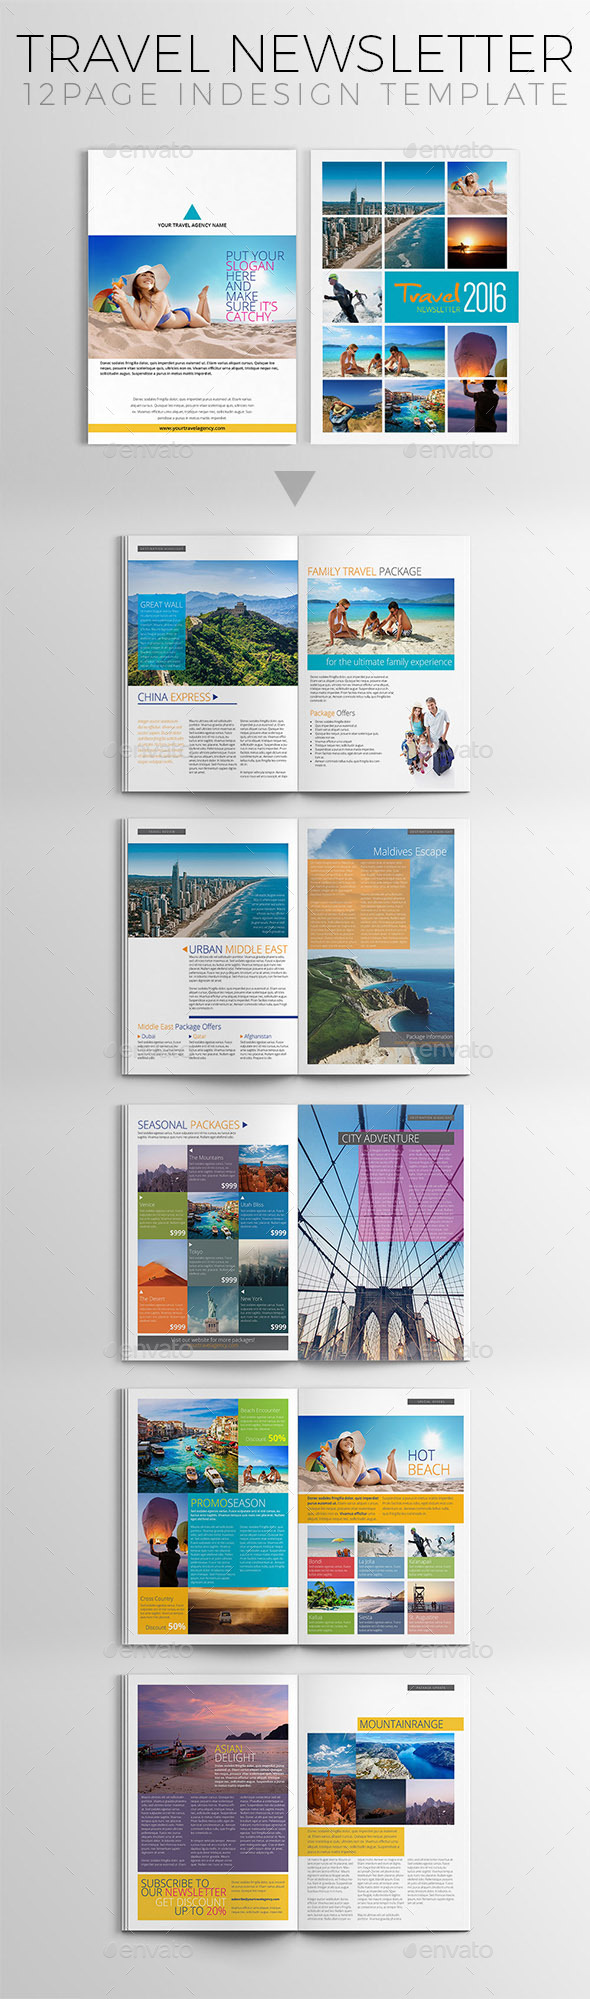 Travel Newsletter Template by hermin_utomo GraphicRiver